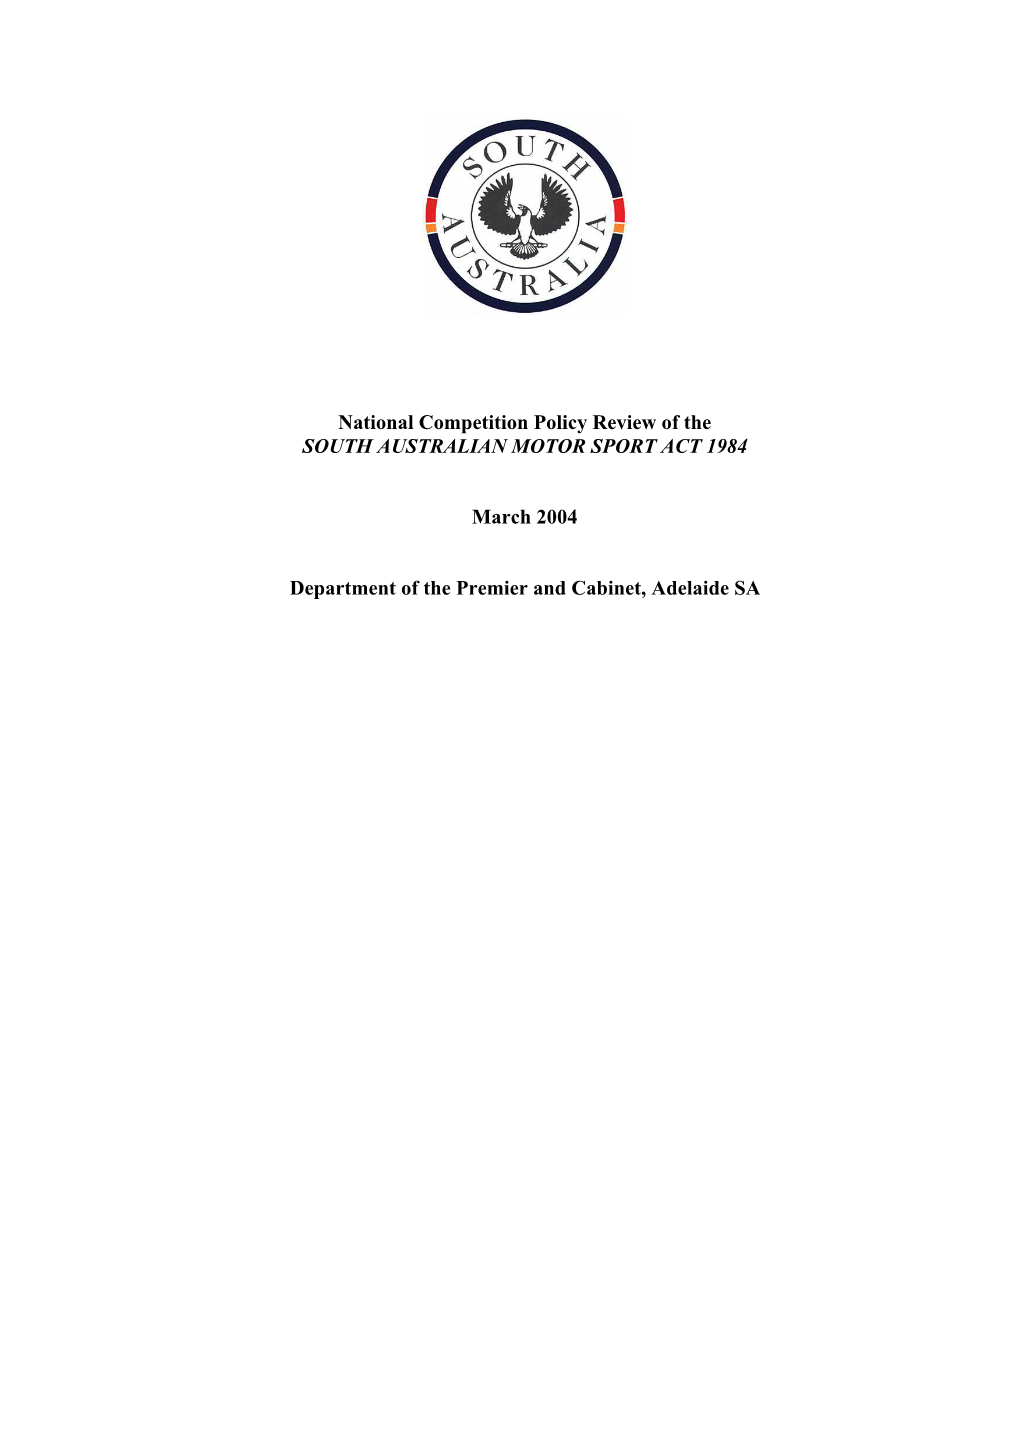 National Competition Policy Review of the SOUTH AUSTRALIAN MOTOR SPORT ACT 1984